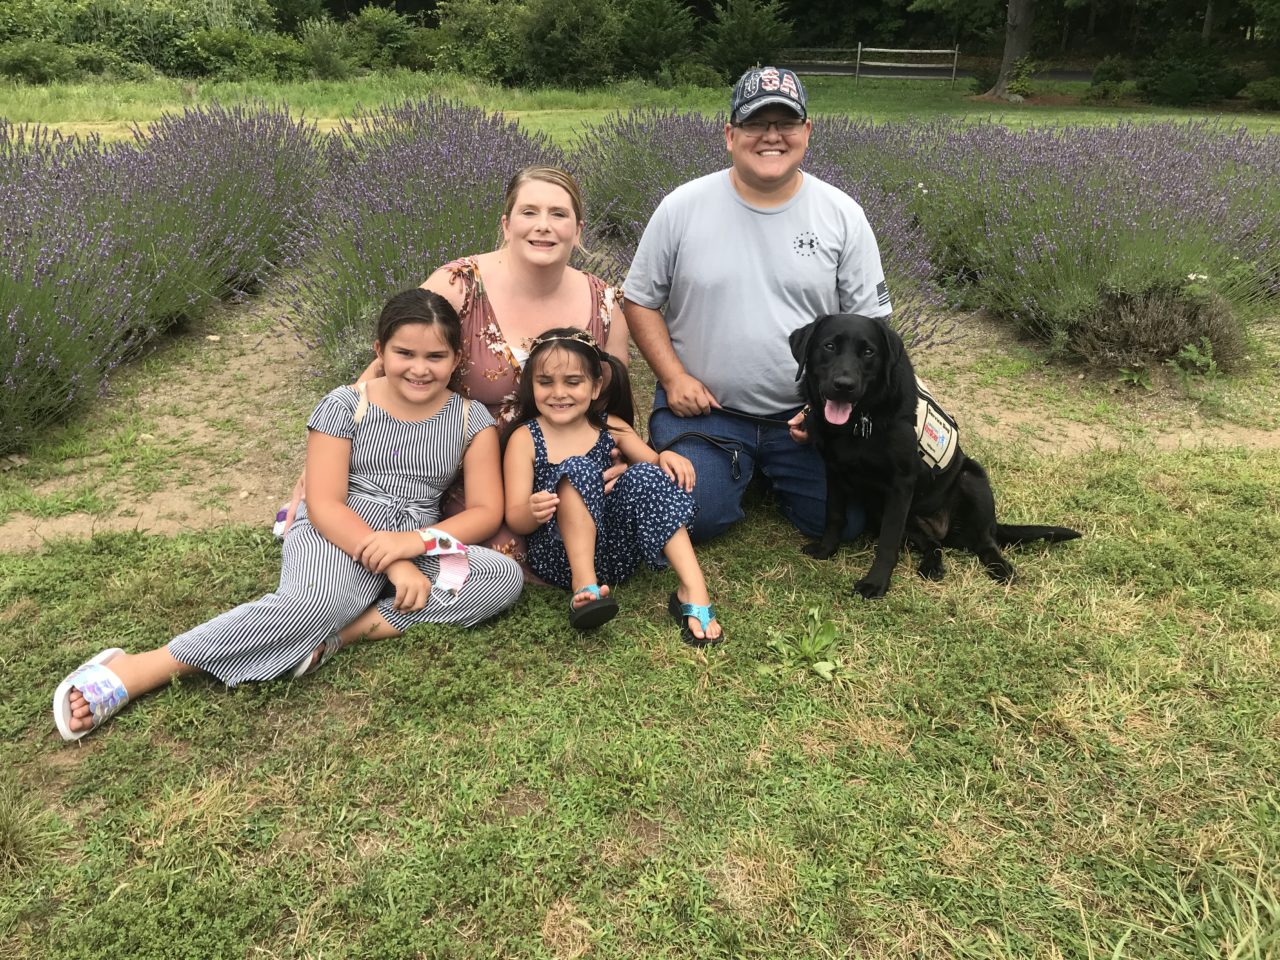 Family smiling with their therapy dog during an outing to a lavender farm.